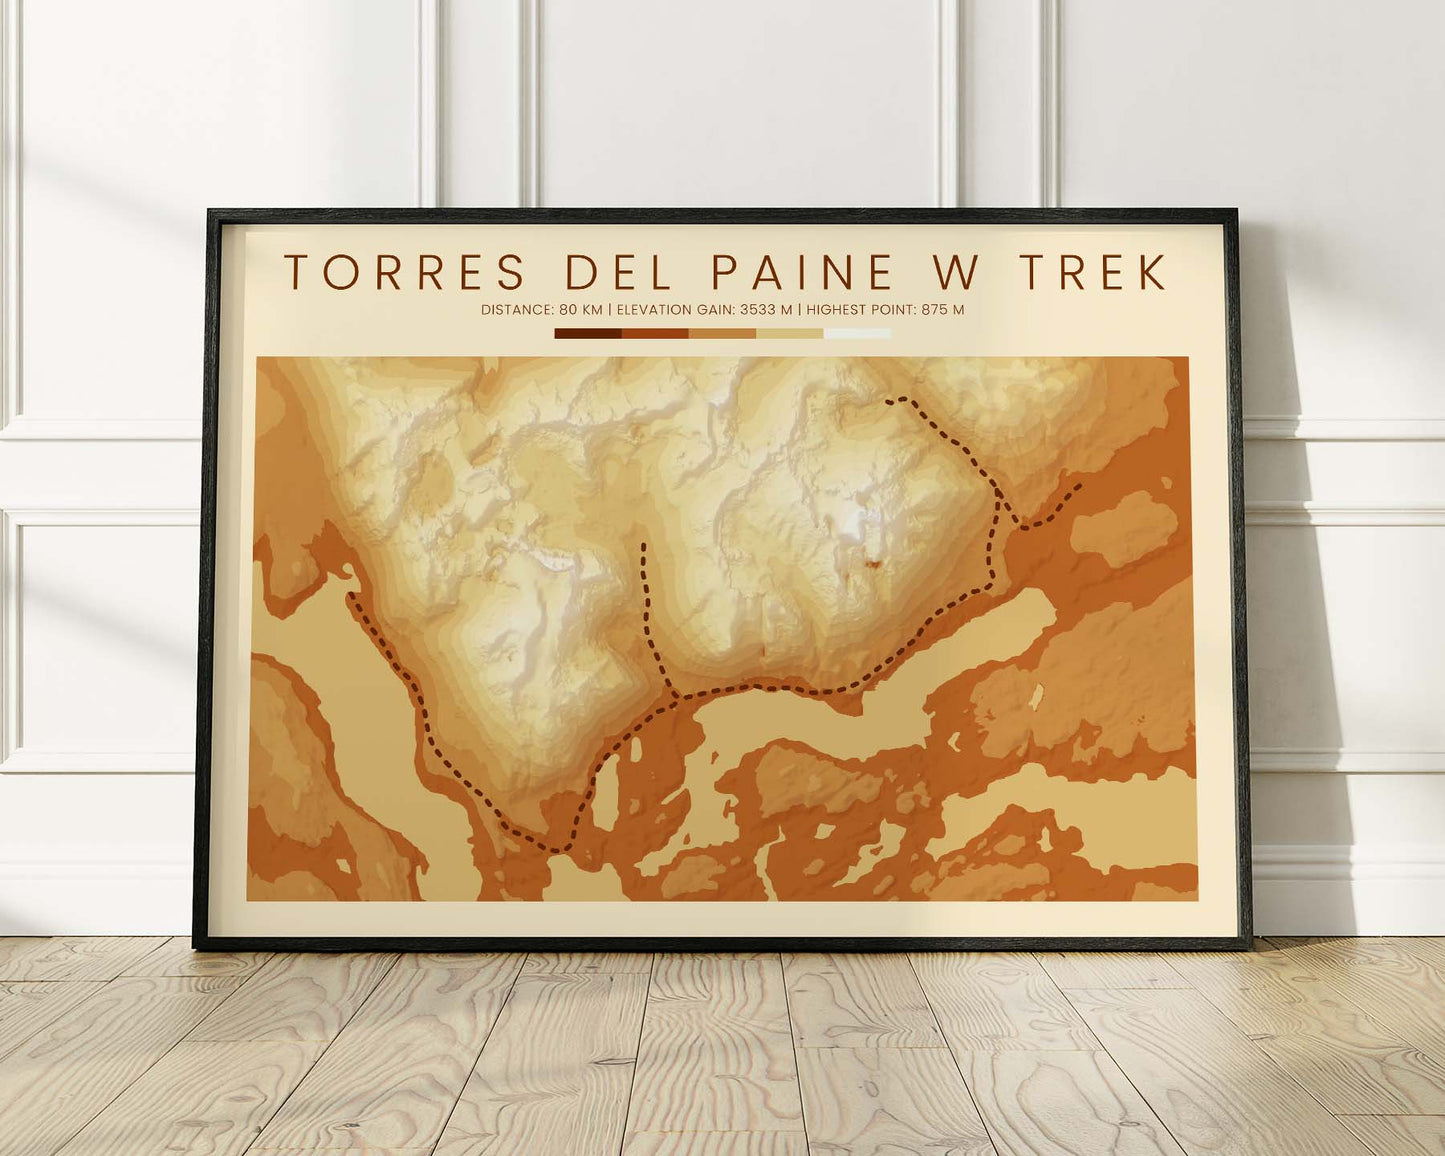 Torres Del Paine W Circuit (Patagonia) Trail Wall Decor with Vintage Orange Background